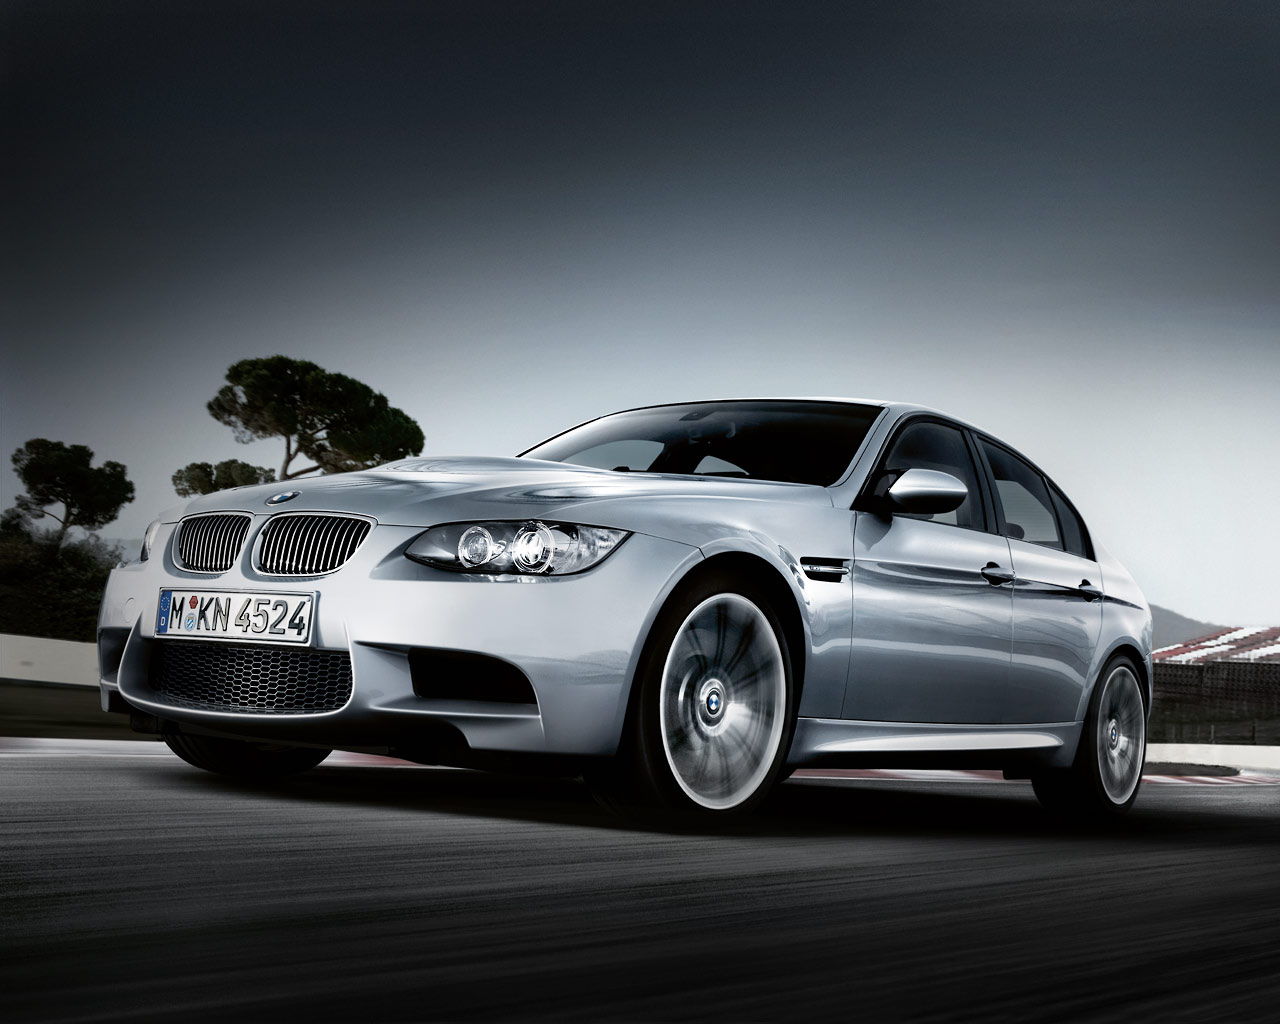 BMW M3 Wallpaper | BMW wallpapers and HD images